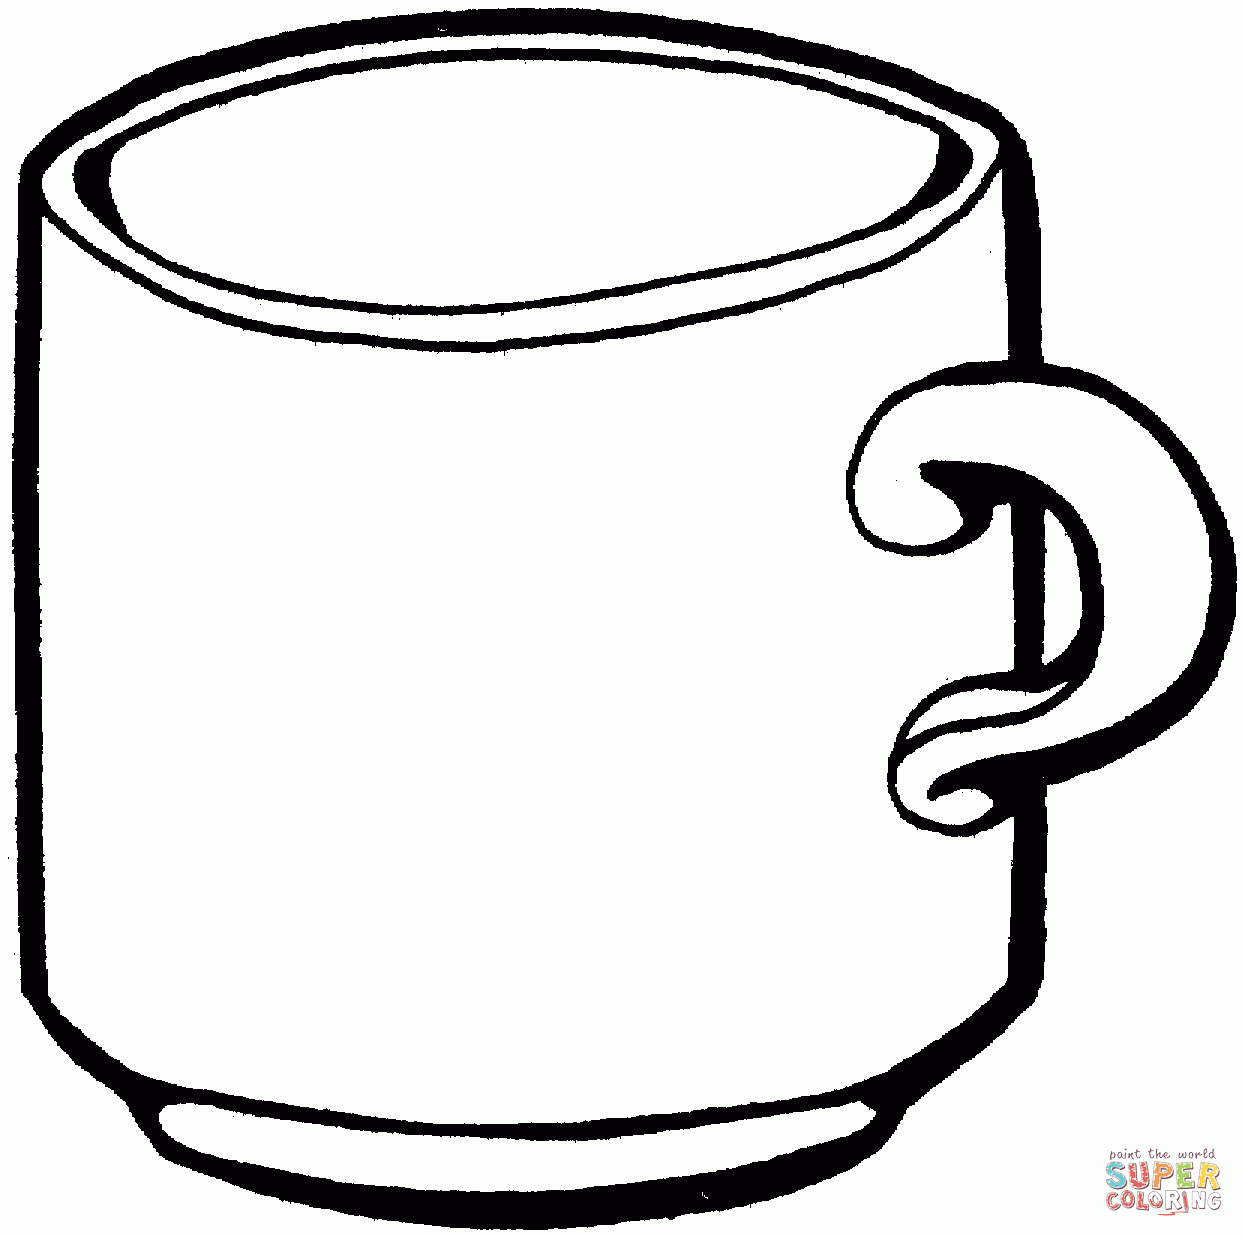 Tea Cup Coloring Page | Free Printable Coloring Pages - Free Printable Tea Cup Coloring Pages